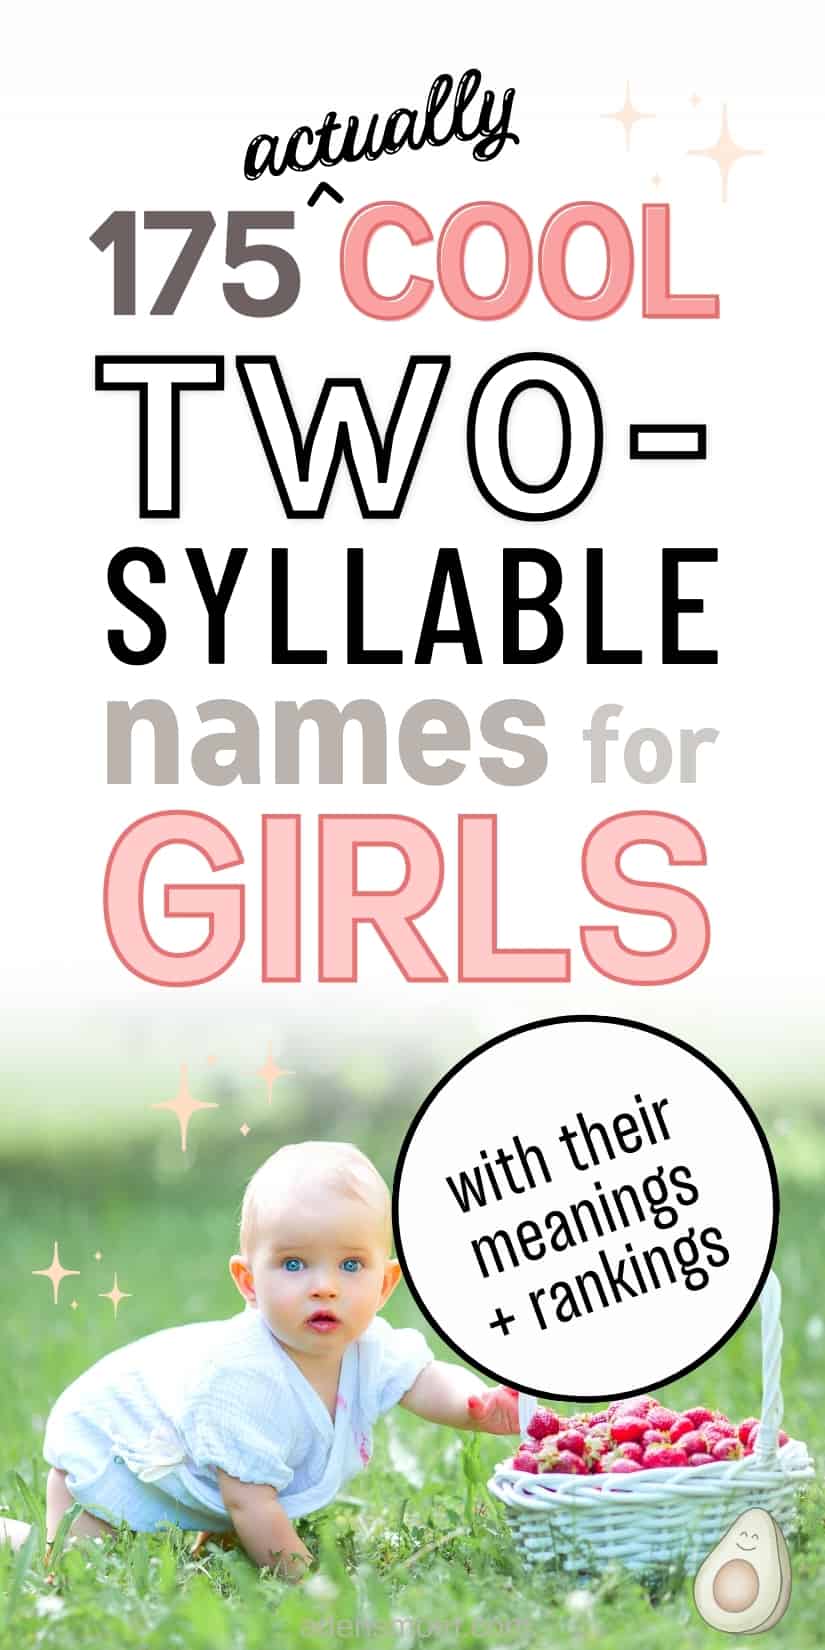 two syllable names for girls